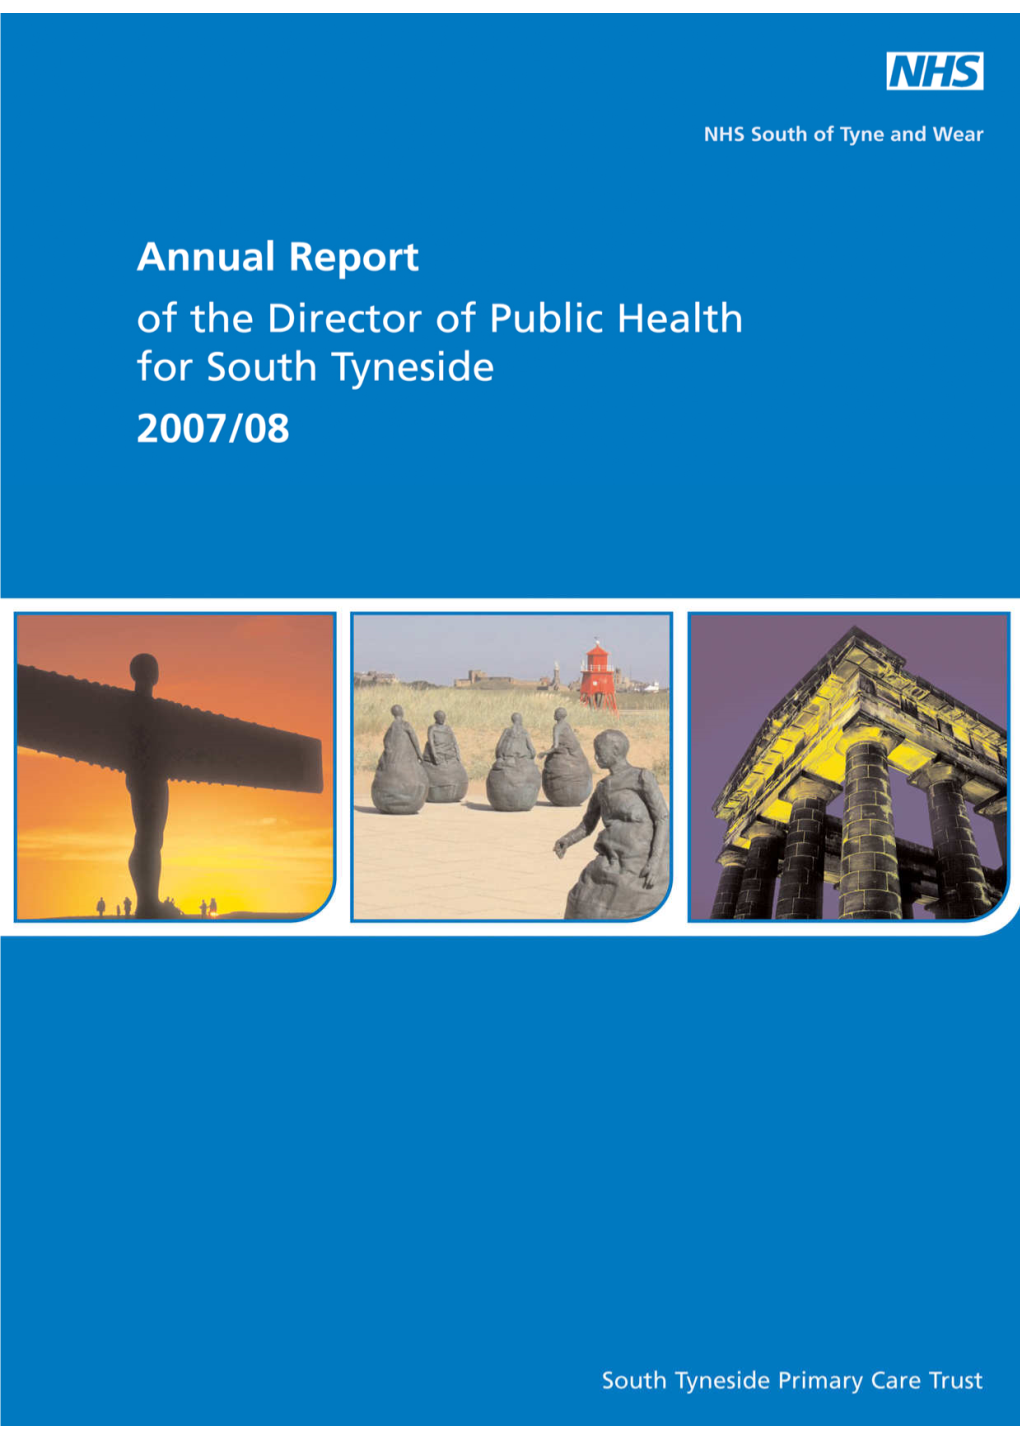 South Tyneside DPH Annual Report 2007-2008 Final Version